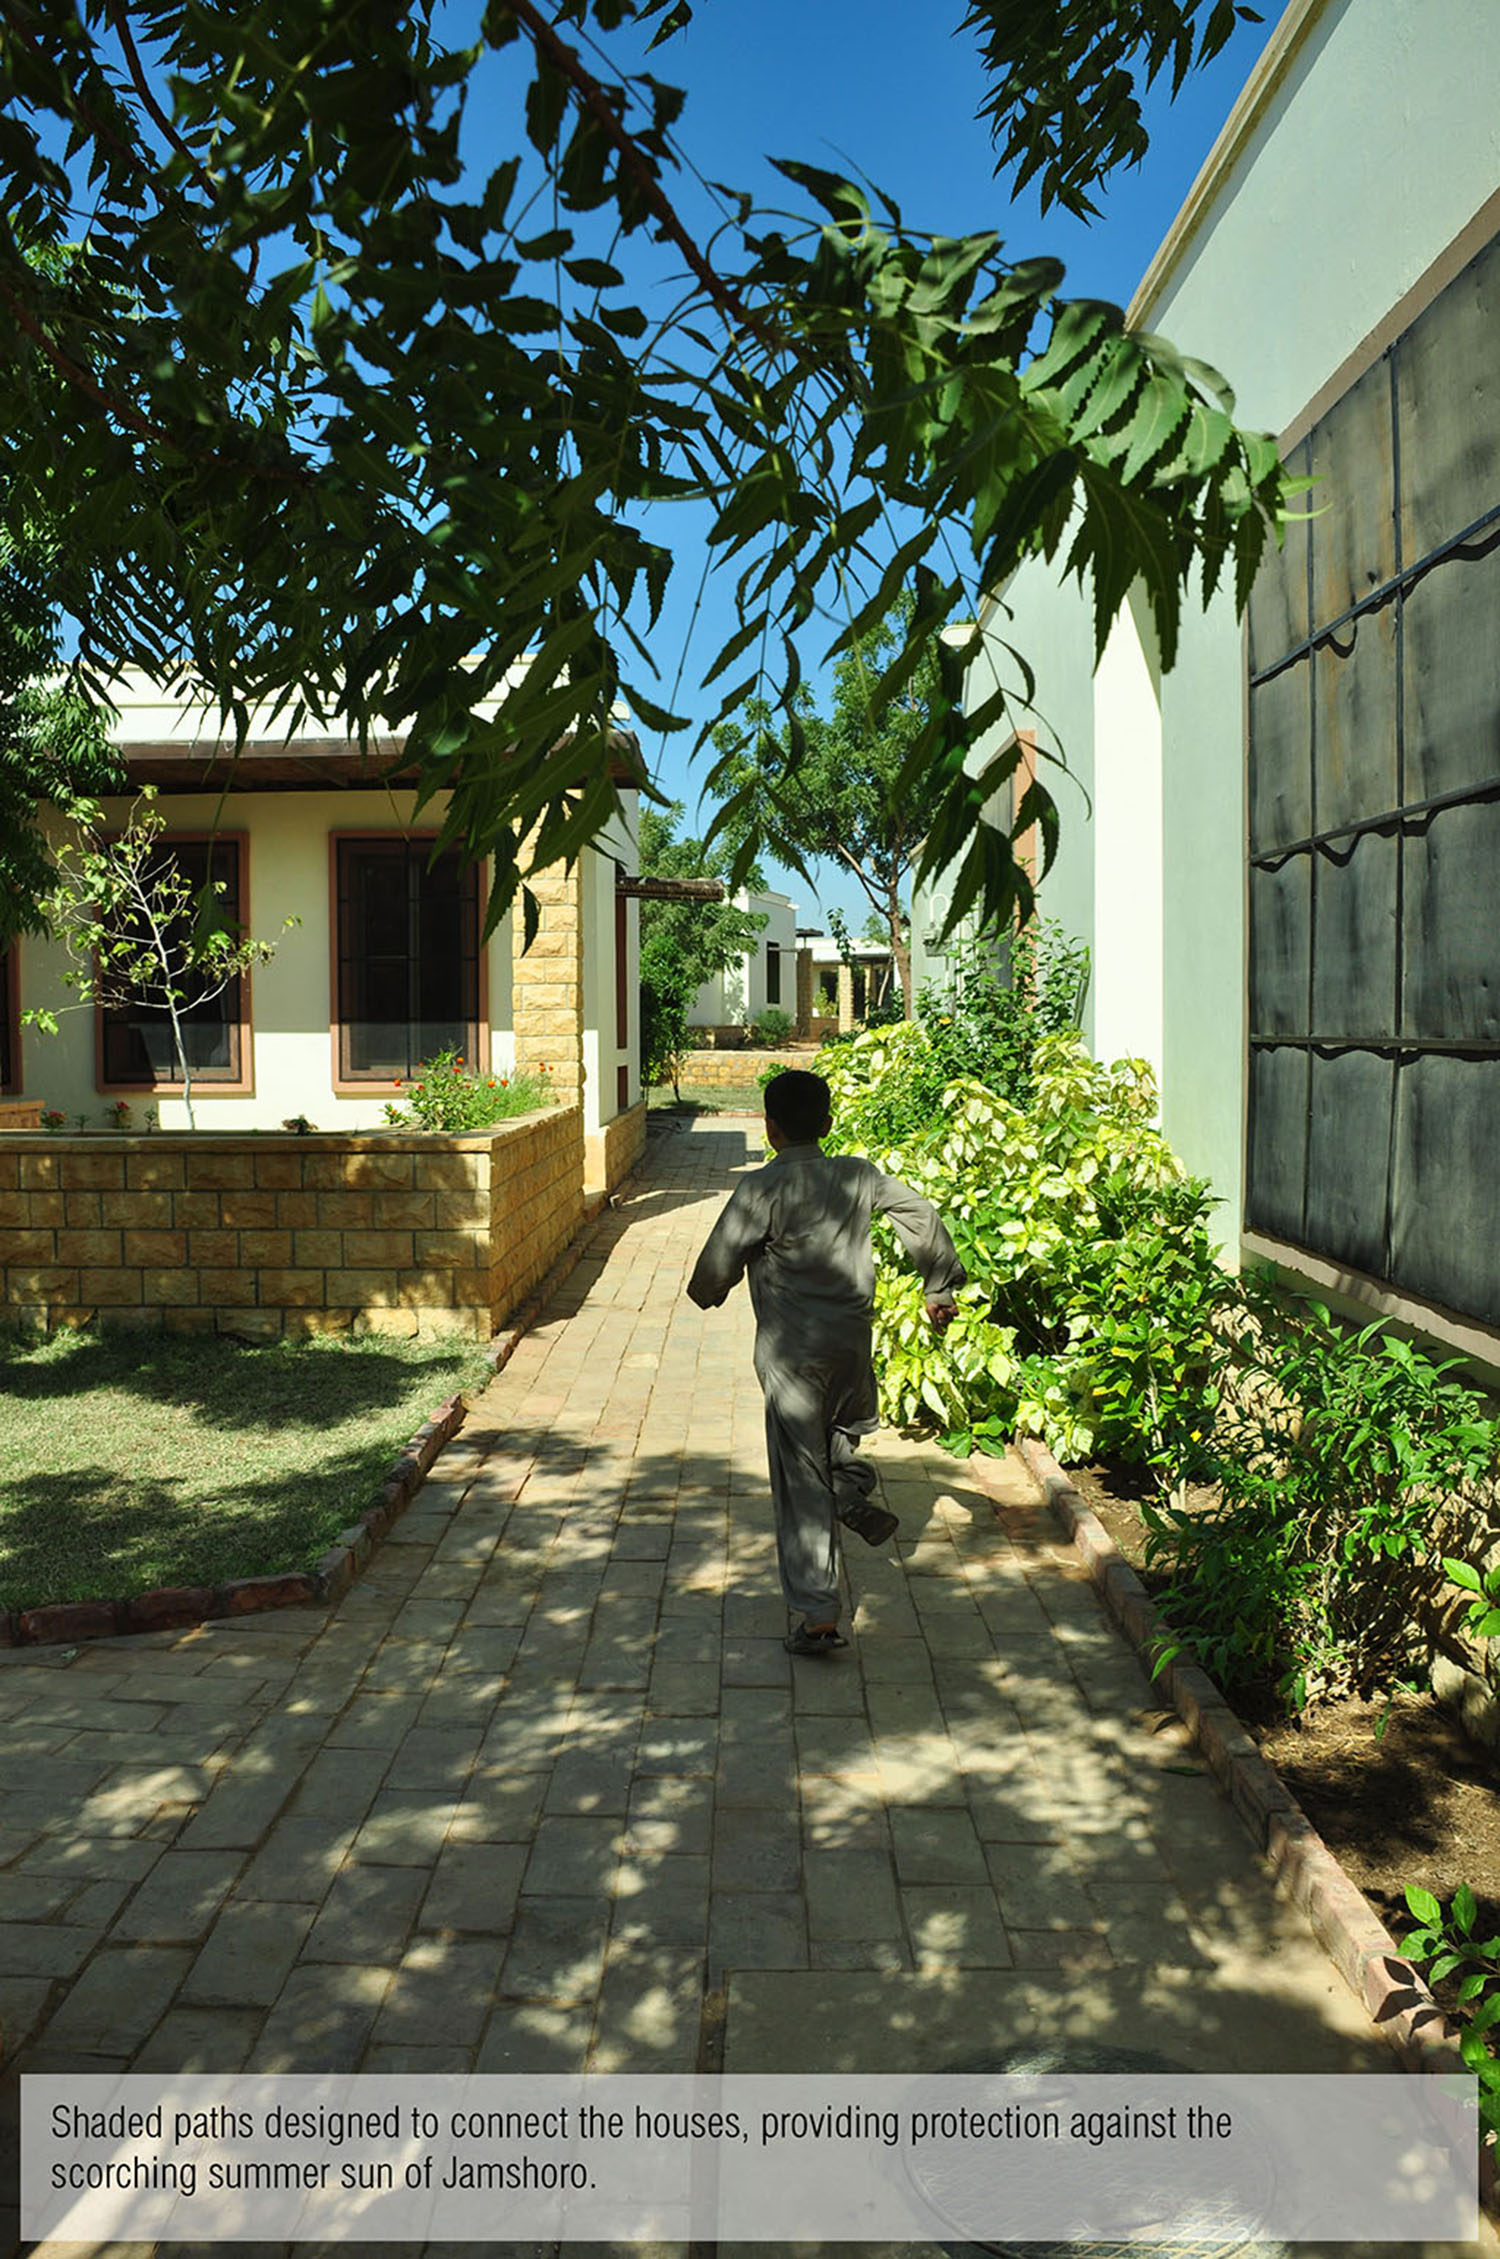 Shaded paths designed to connect the houses, providing protection against the scorching summer sun of Jamshoro